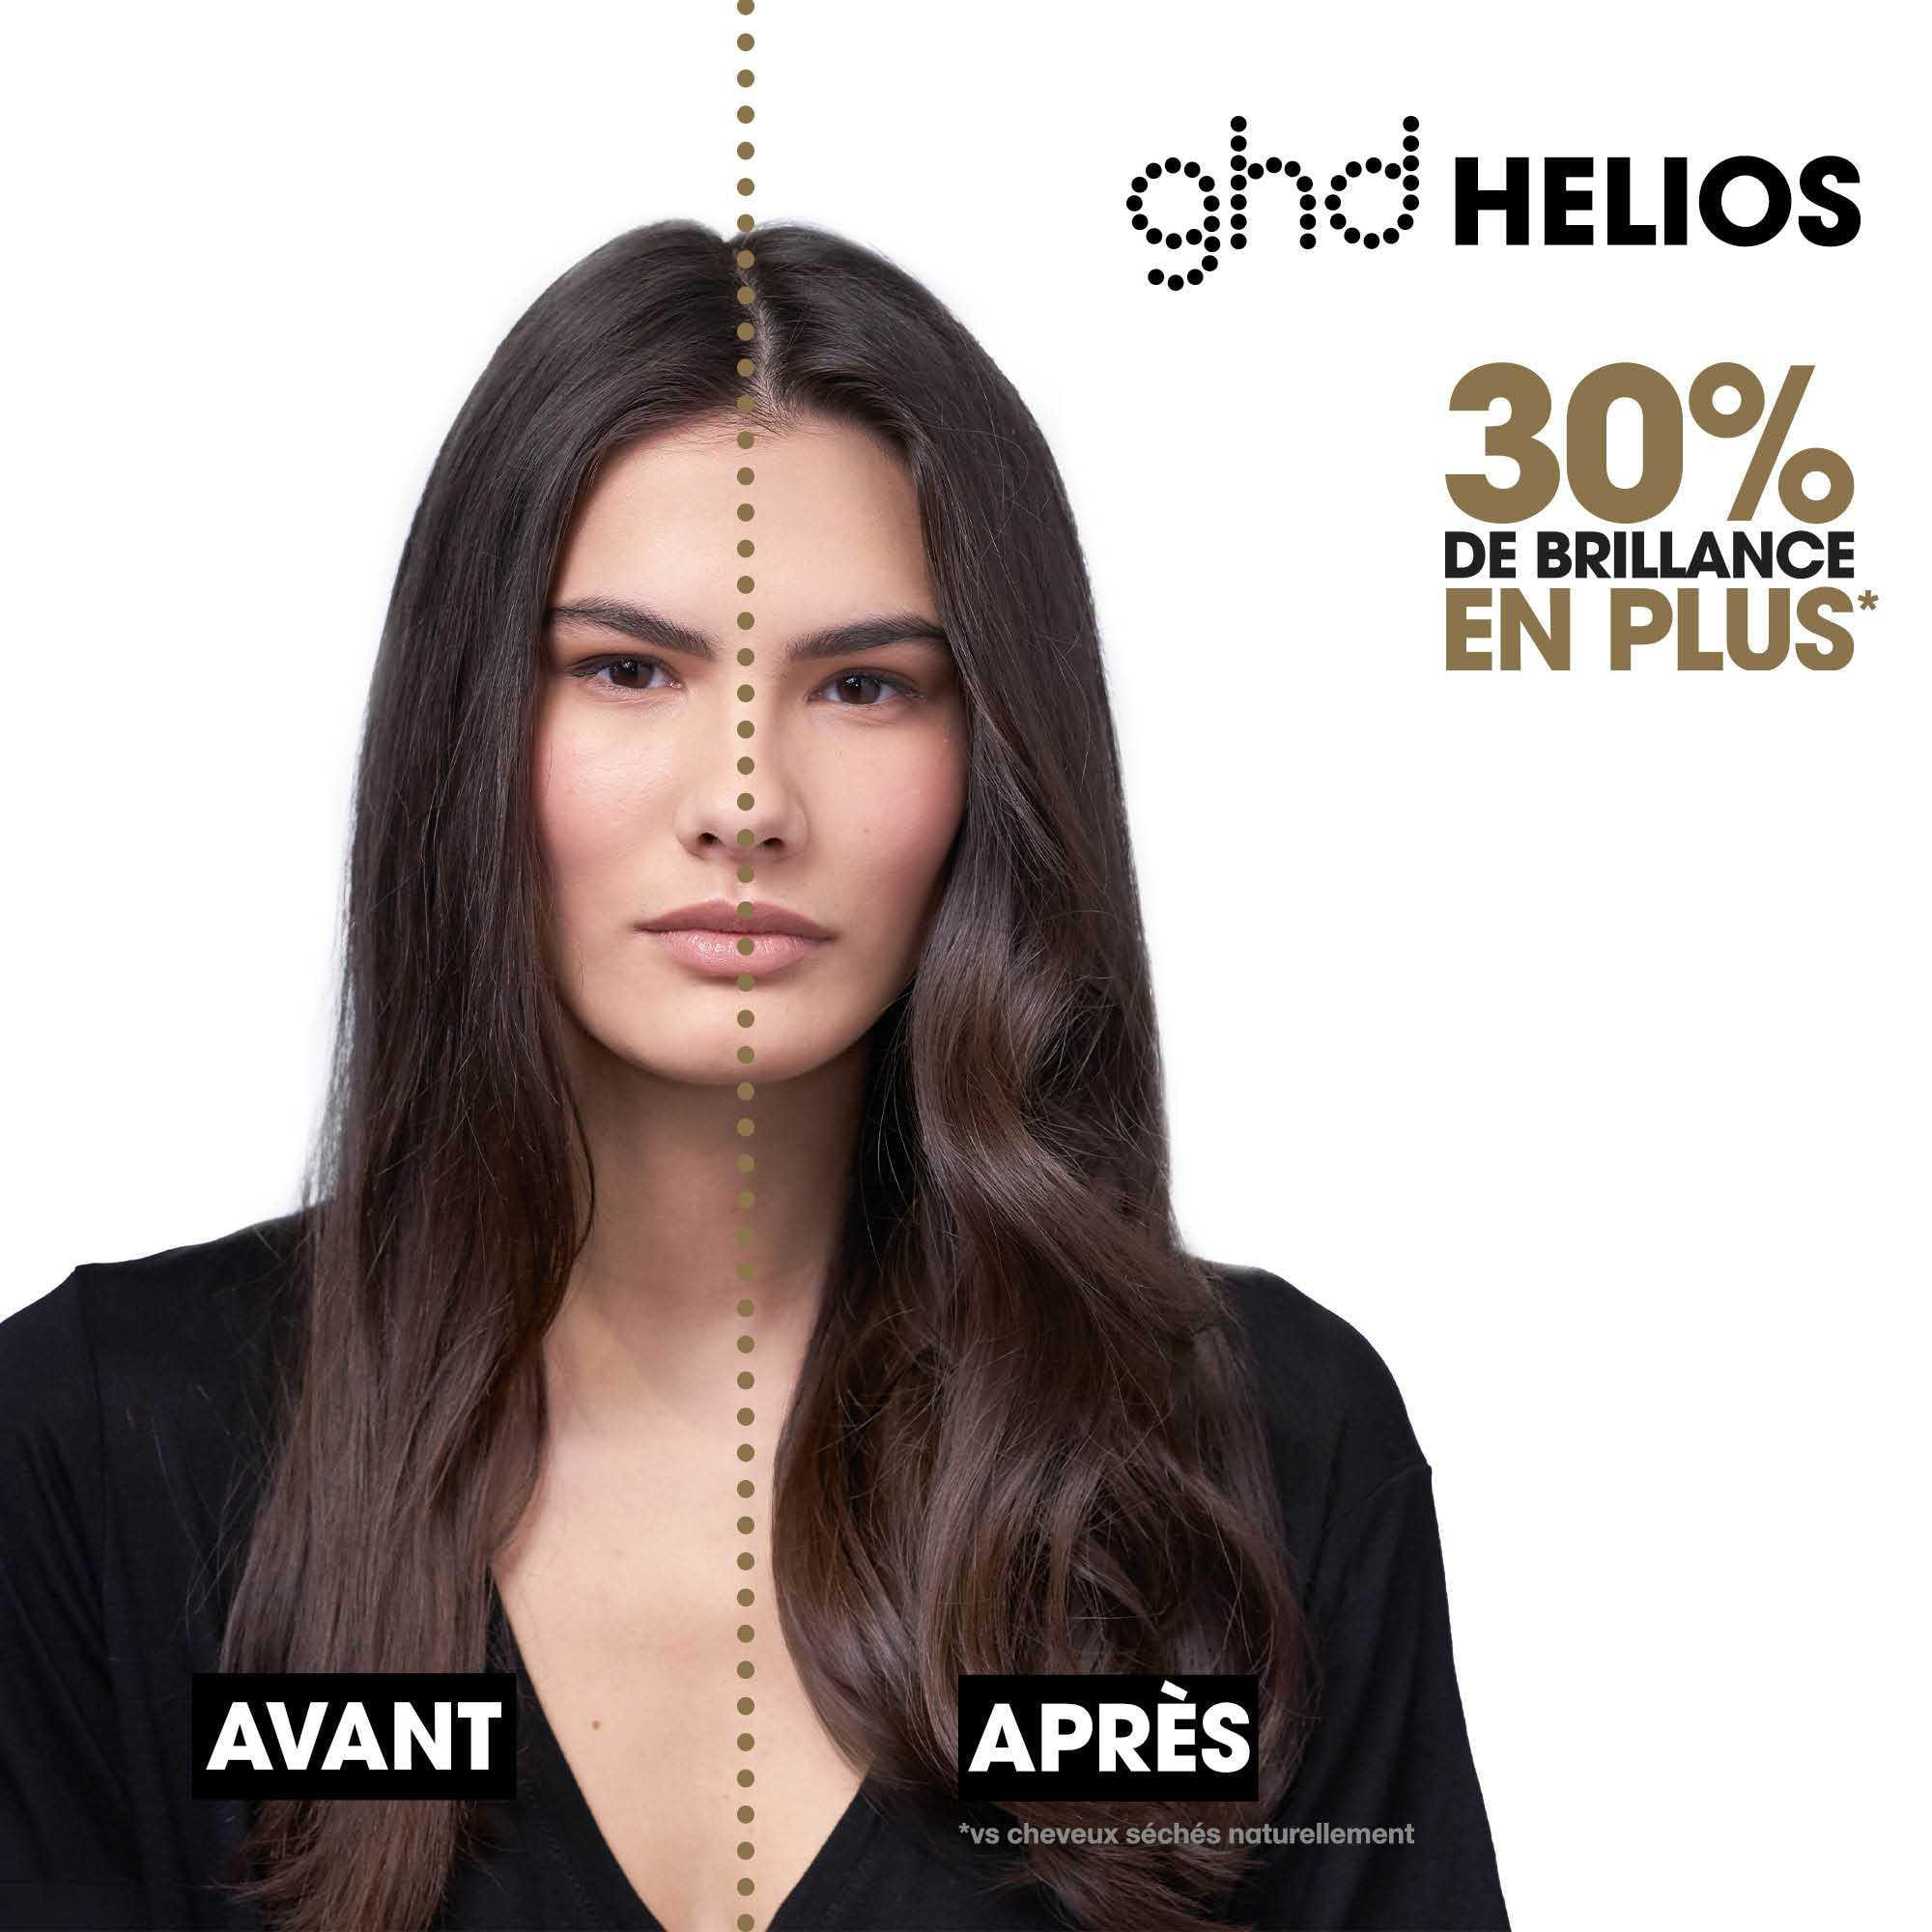 Sèche-cheveux Helios Grand Luxe Collection - GHD - GHD - Toulouse